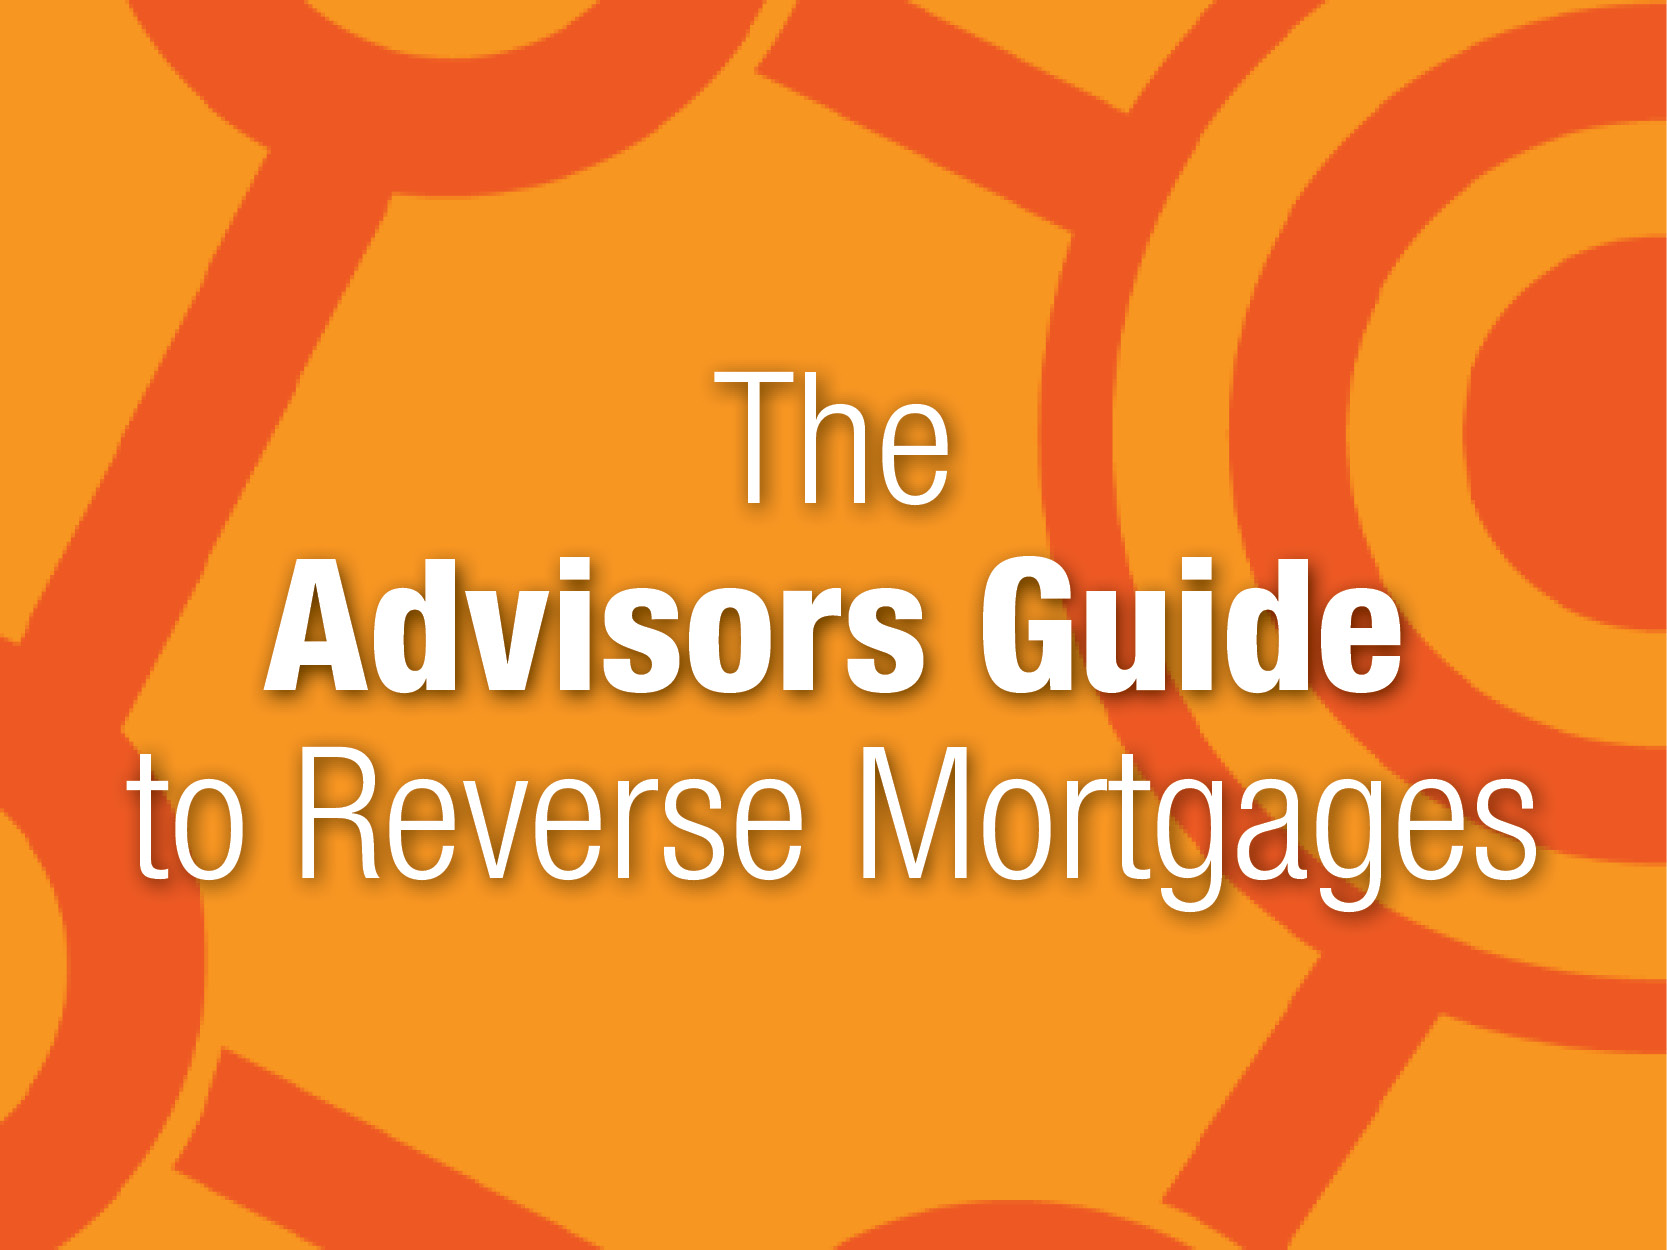 The Advisors Guide to Reverse Mortgages - C2P Central